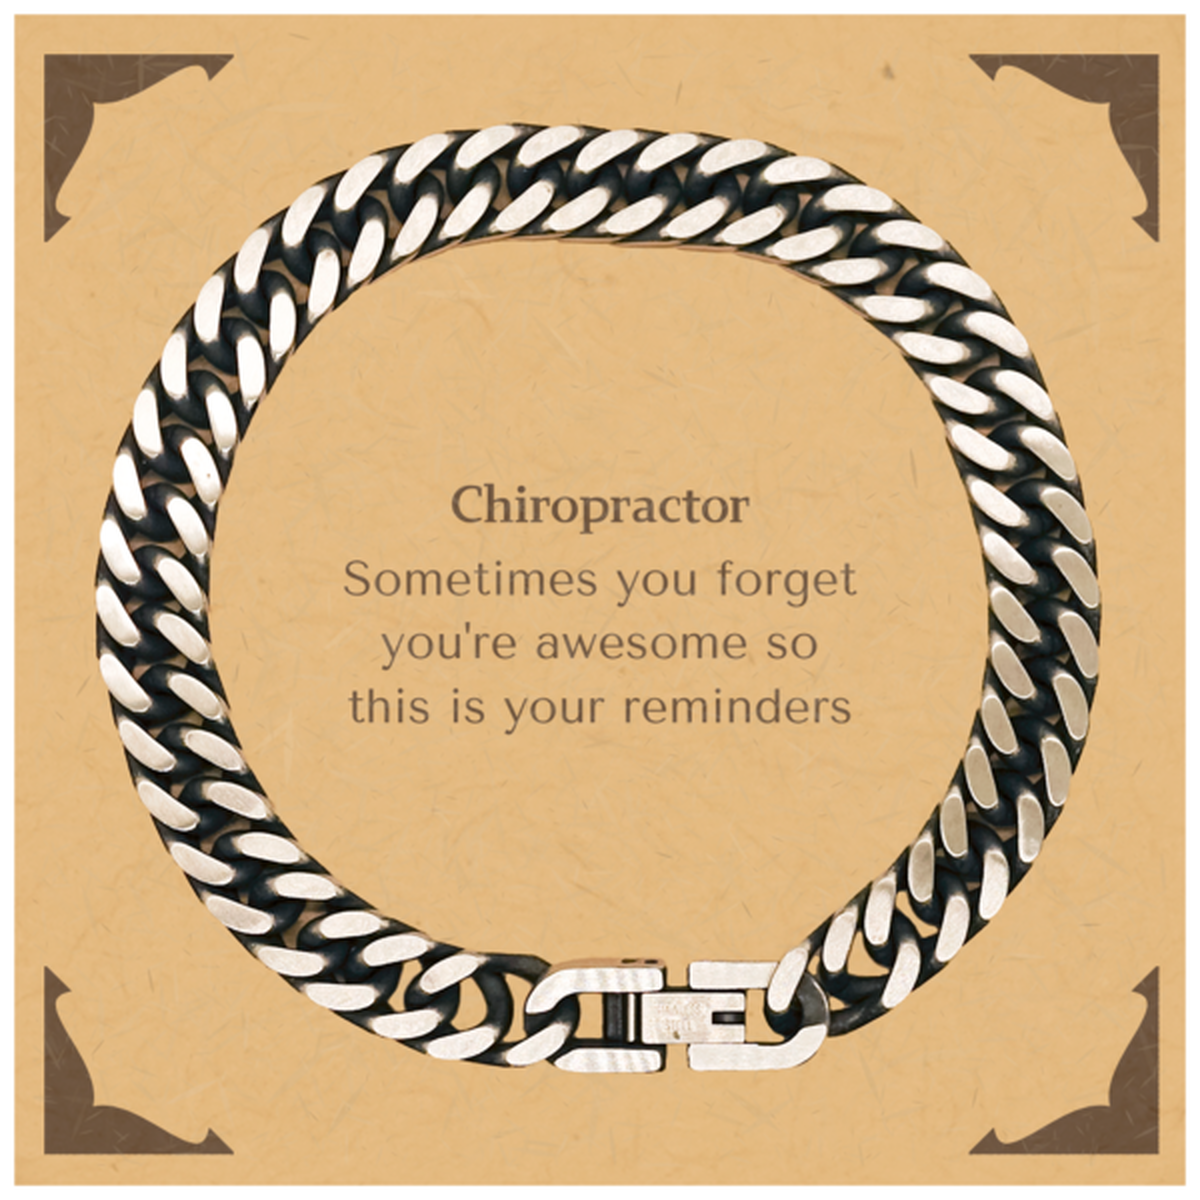 Sentimental Chiropractor Cuban Link Chain Bracelet, Chiropractor Sometimes you forget you're awesome so this is your reminders, Graduation Christmas Birthday Gifts for Chiropractor, Men, Women, Coworkers